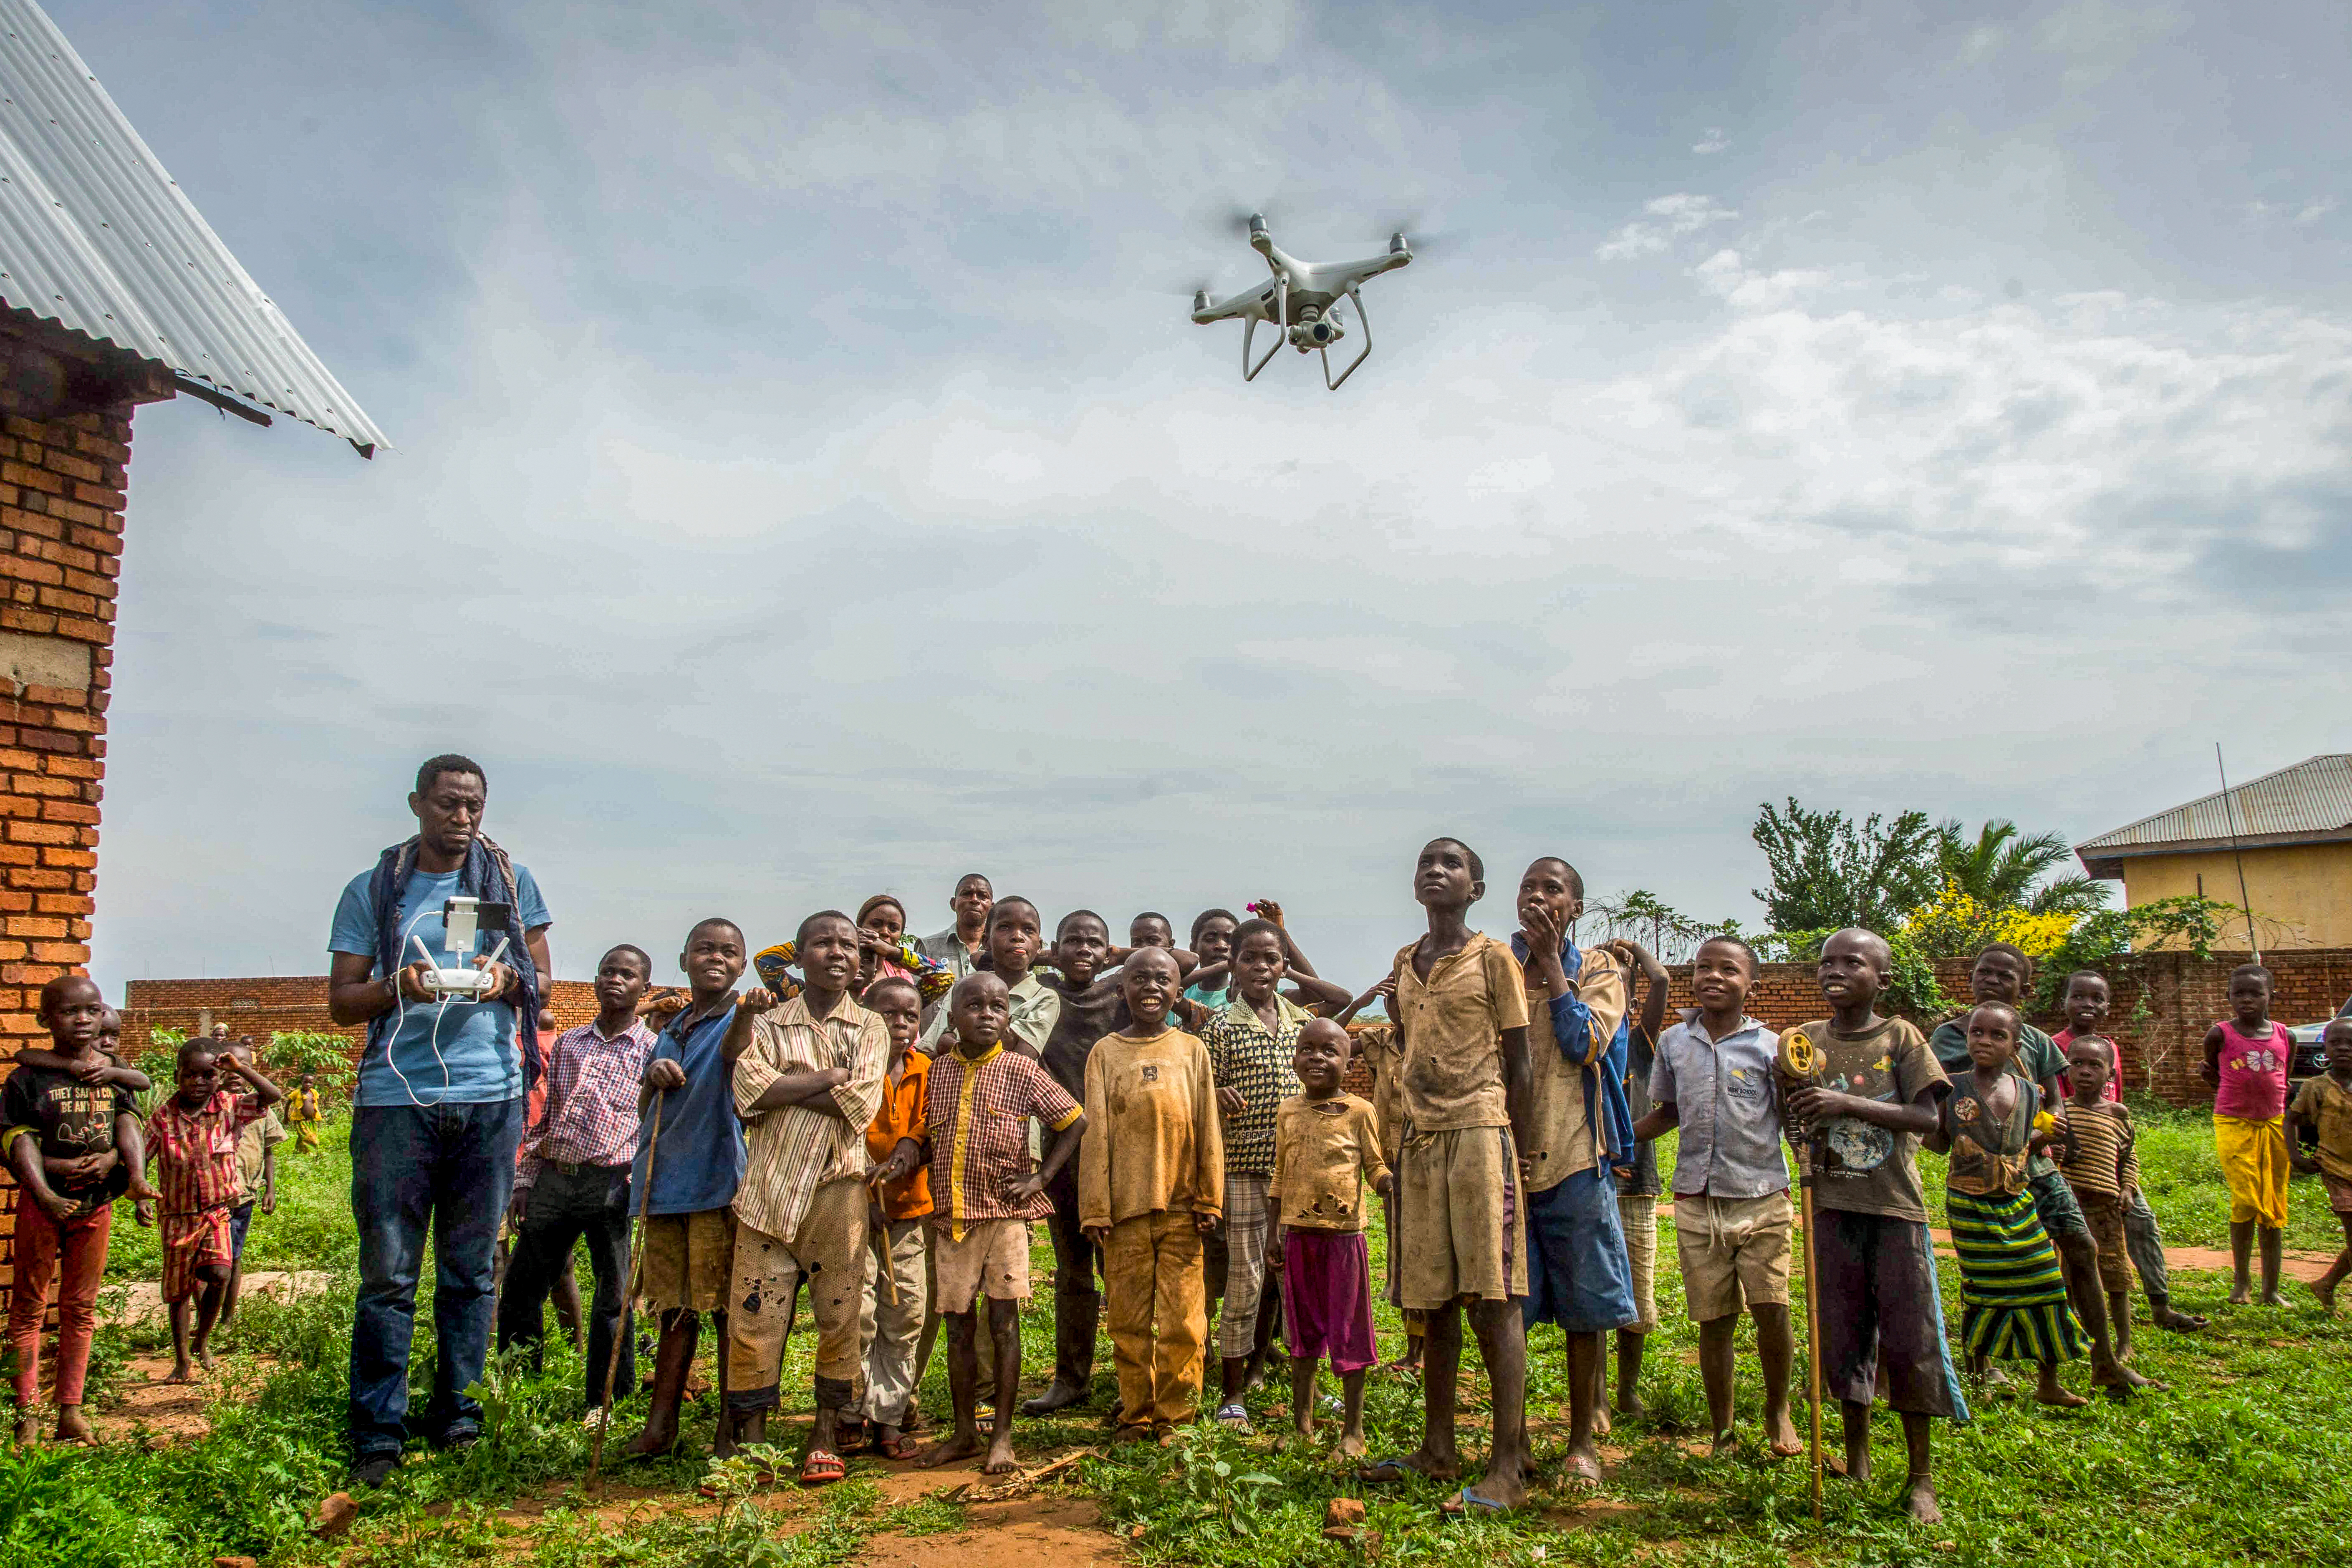 Children in the Democratic Republic of Congo look up to a drone flying over their heads.